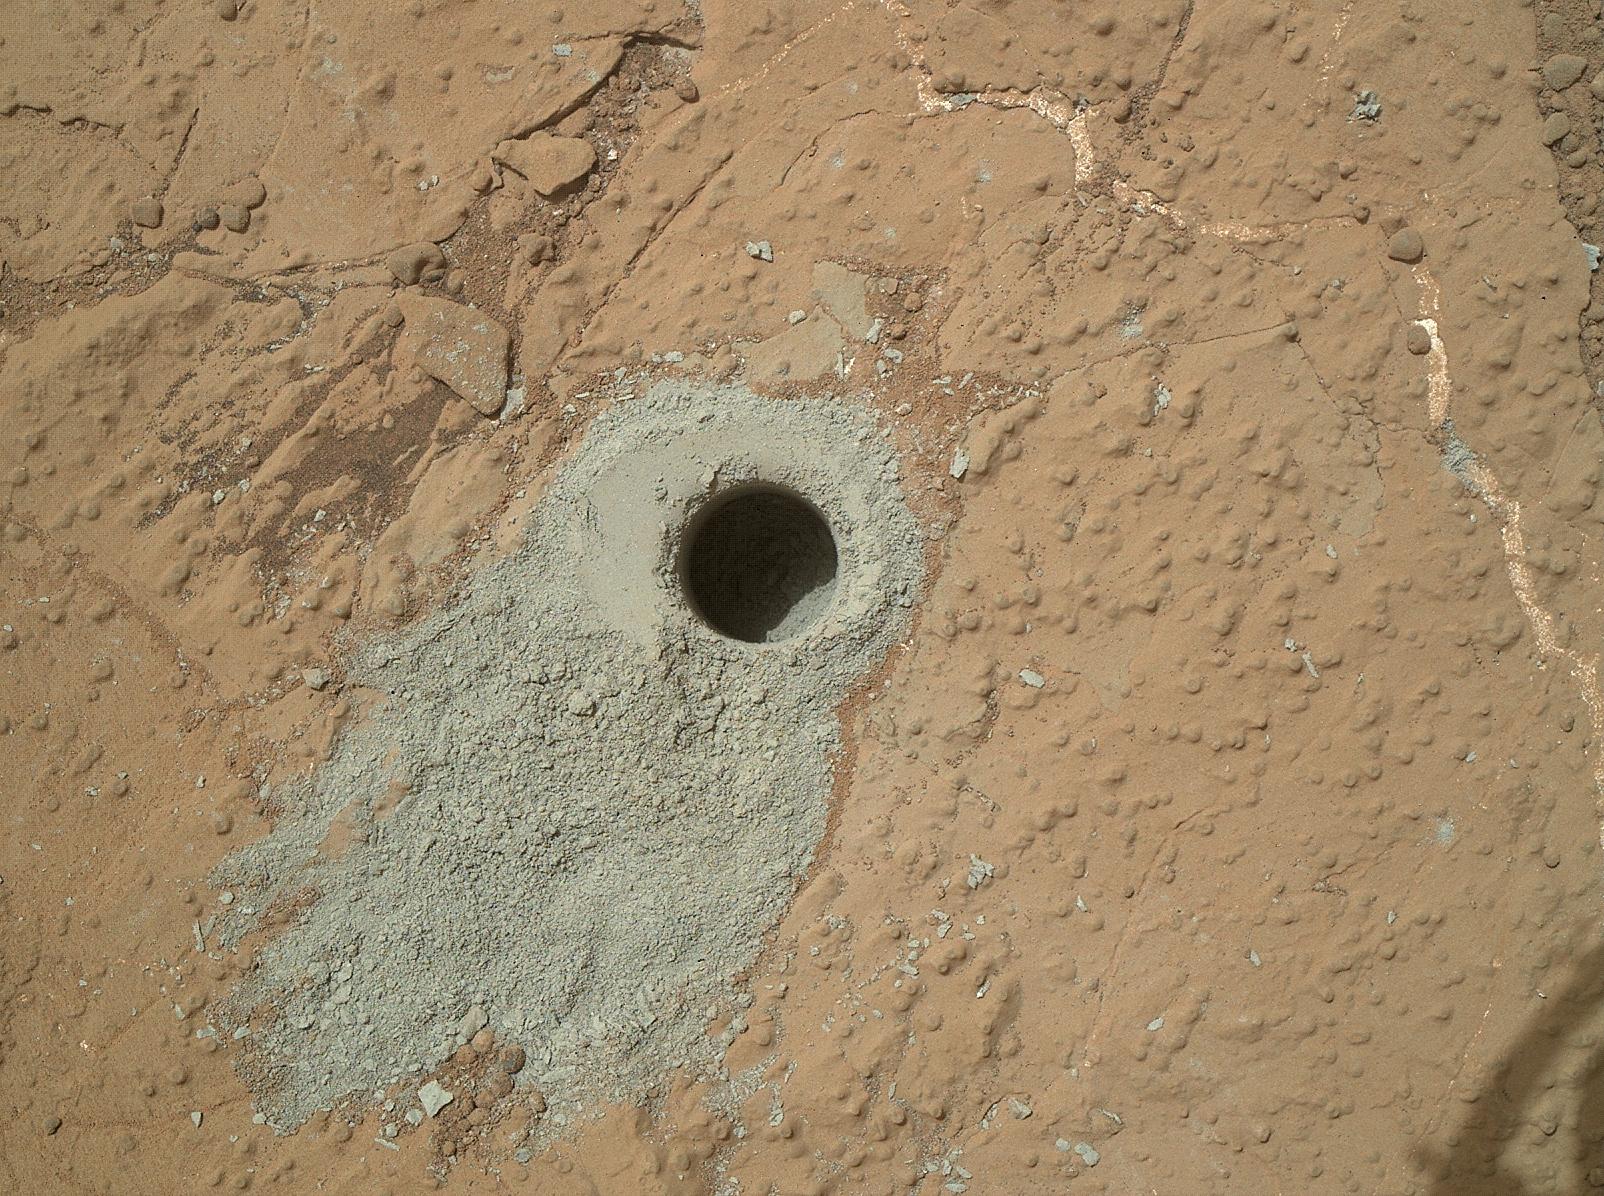 A drilled hole surrounded by gray dust on the red surface of Mars.